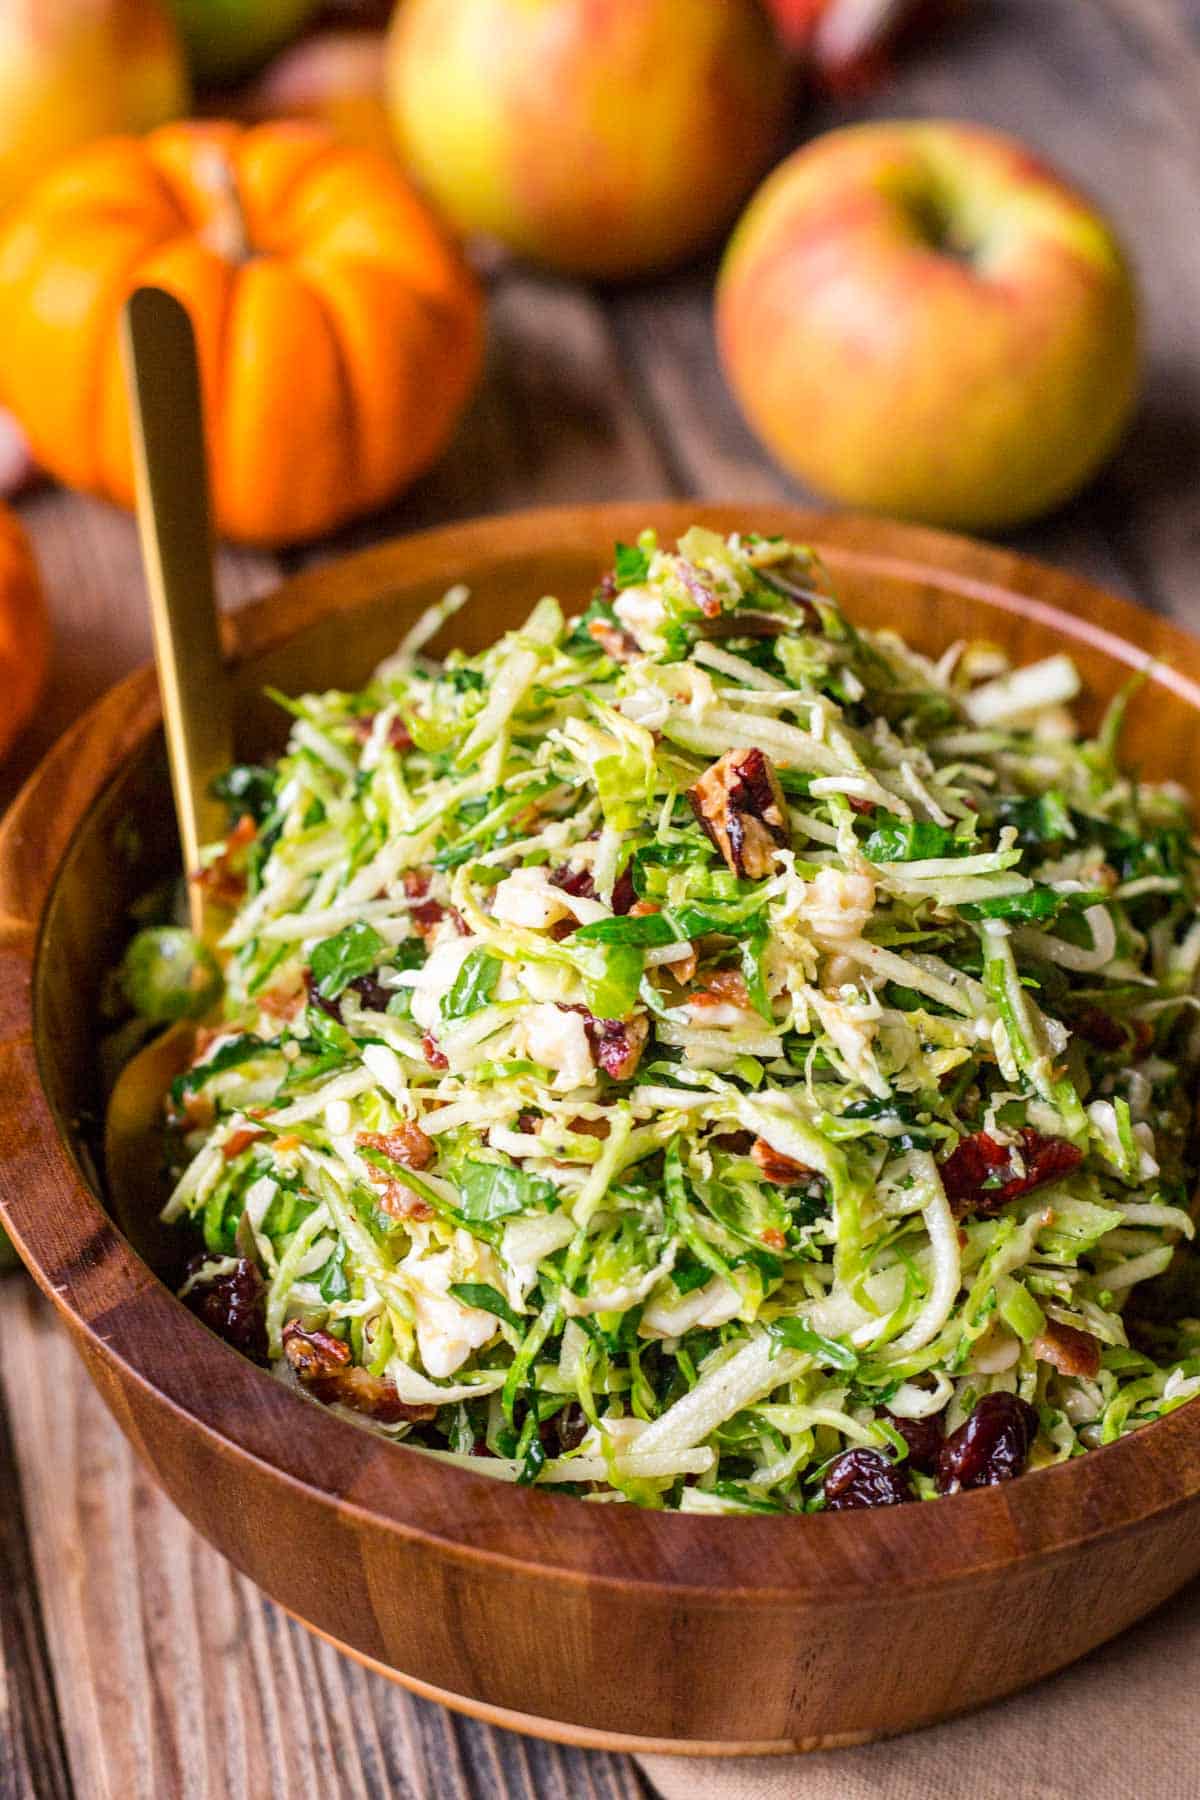 Side view of a shaved Brussels sprout salad in a wooden bowl.